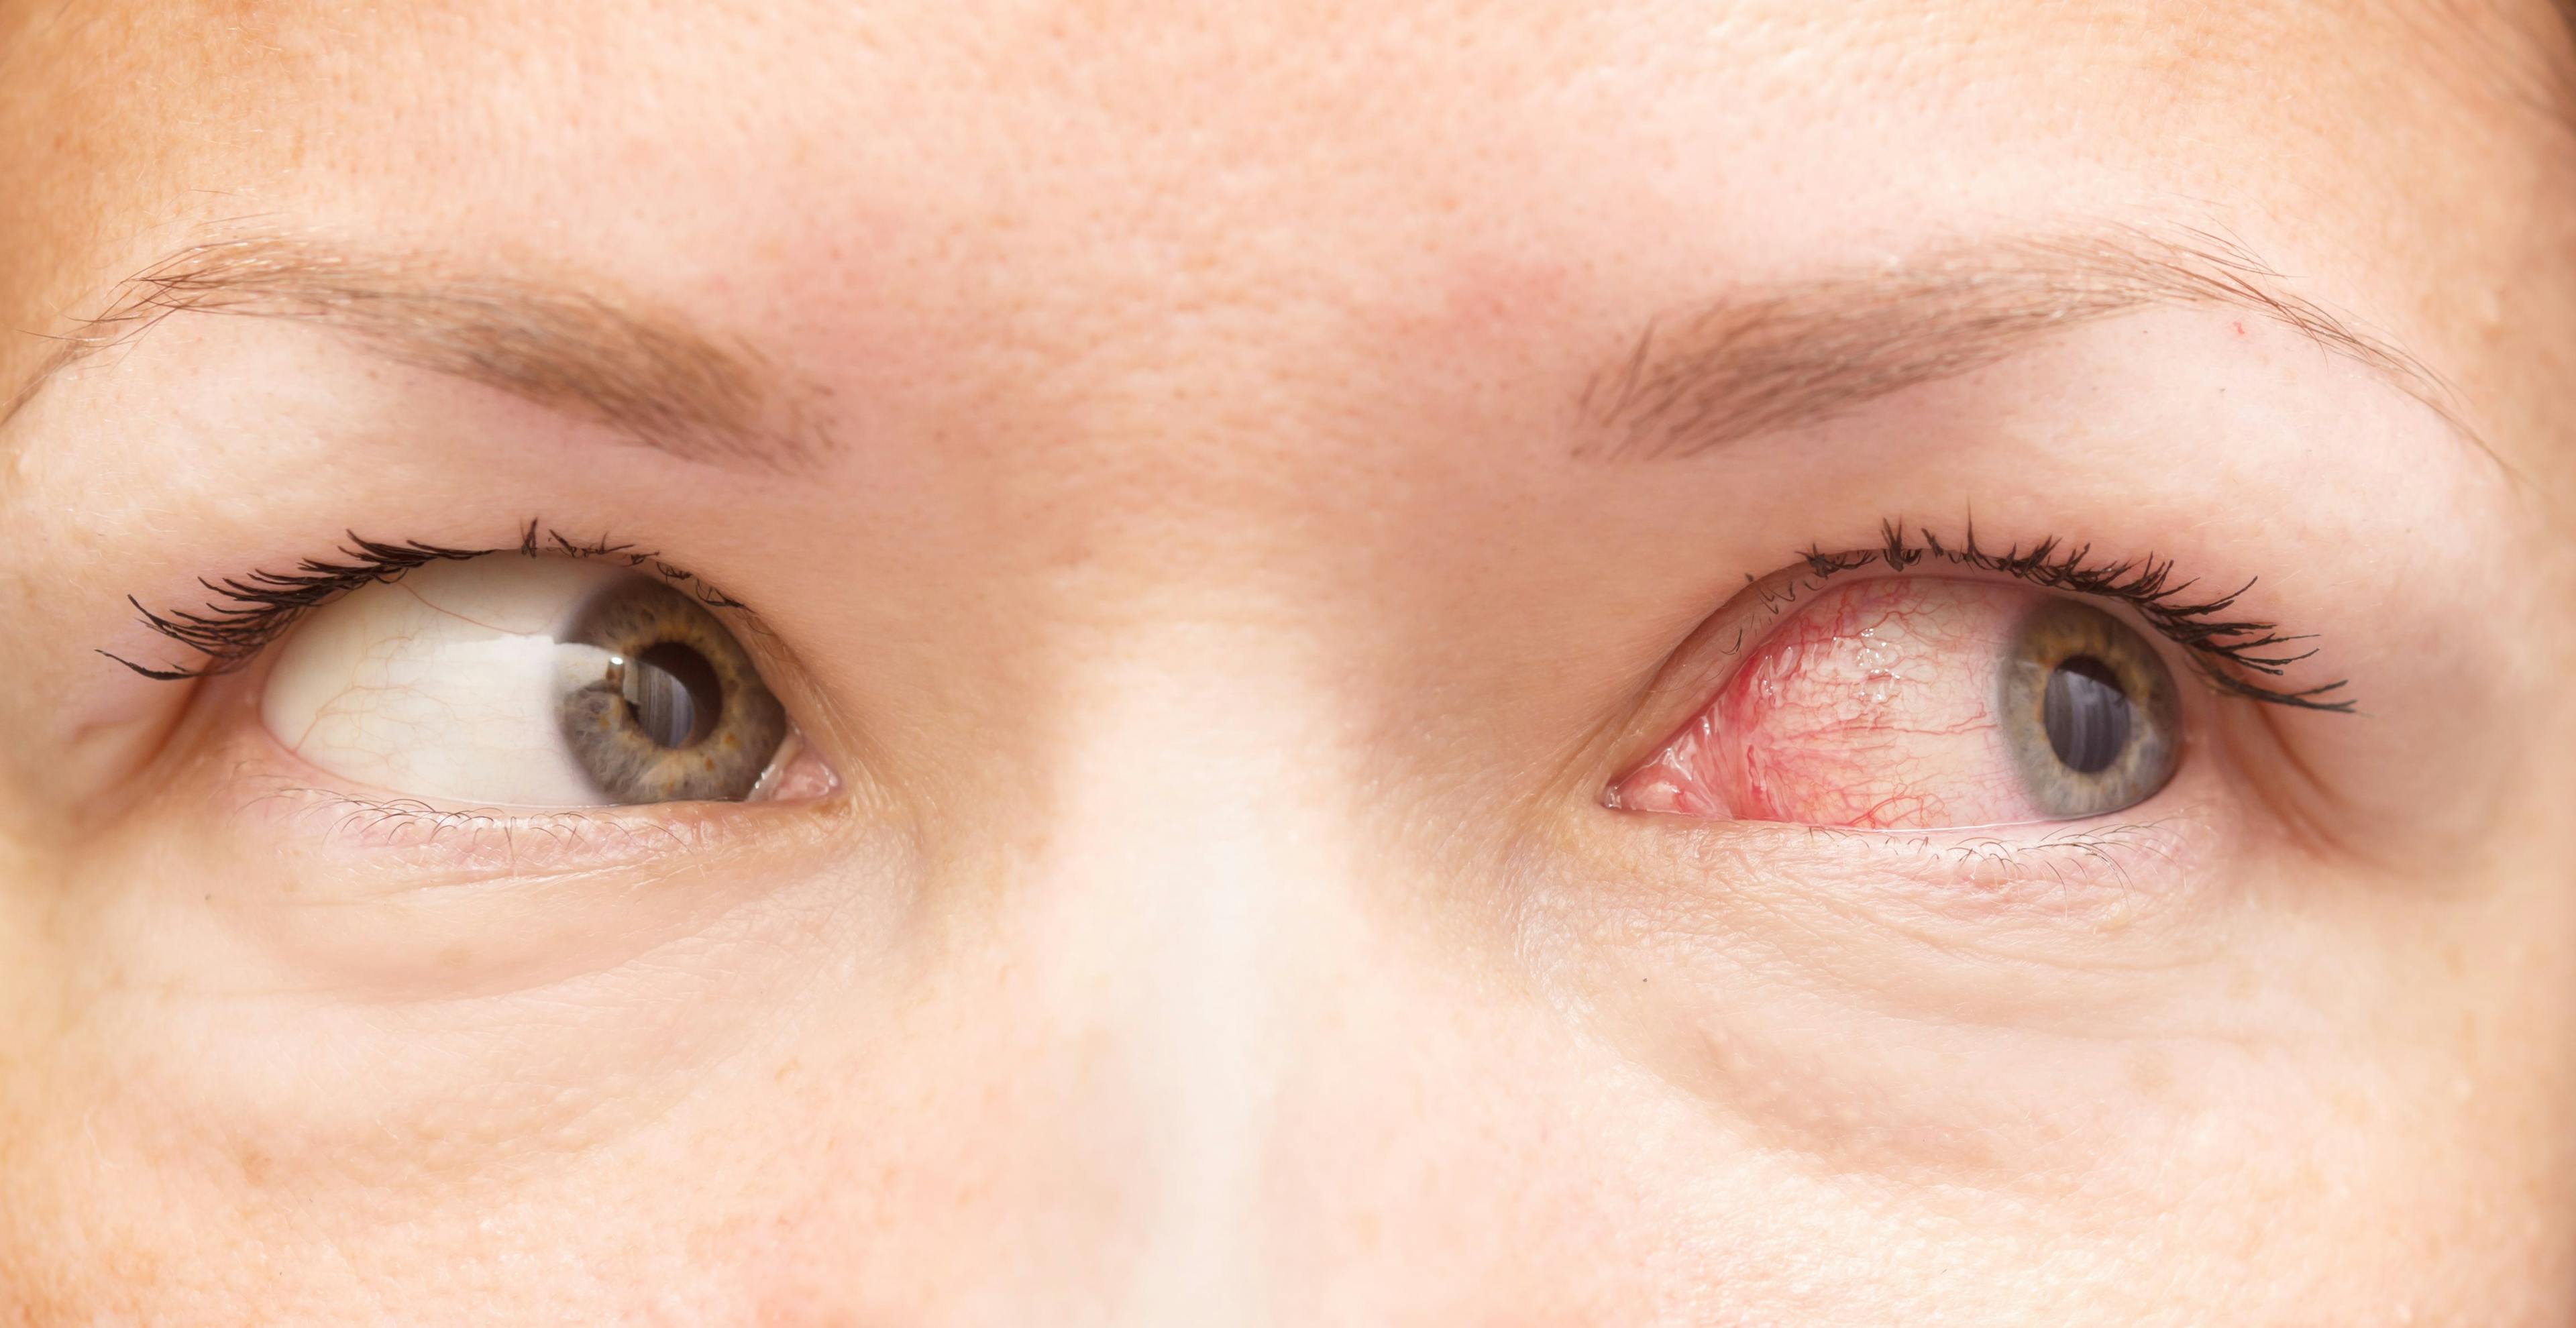 Peer-reviewed literature answers 3 questions about COVID-19 and conjunctivitis